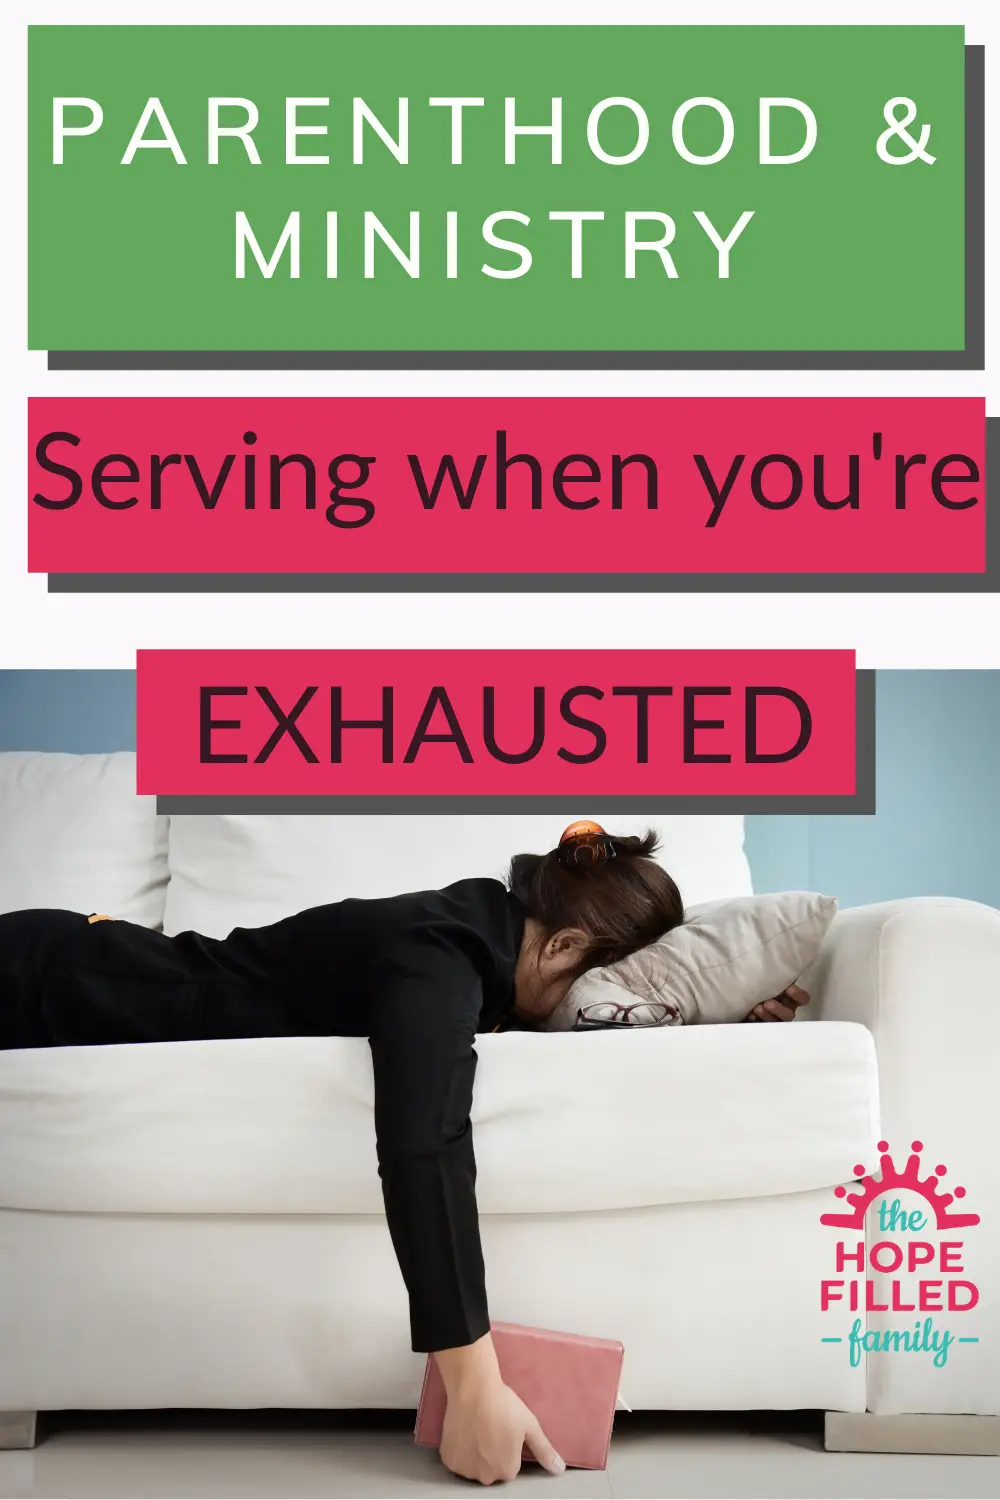 How do I engage in church ministry when I'm an exhausted parent?